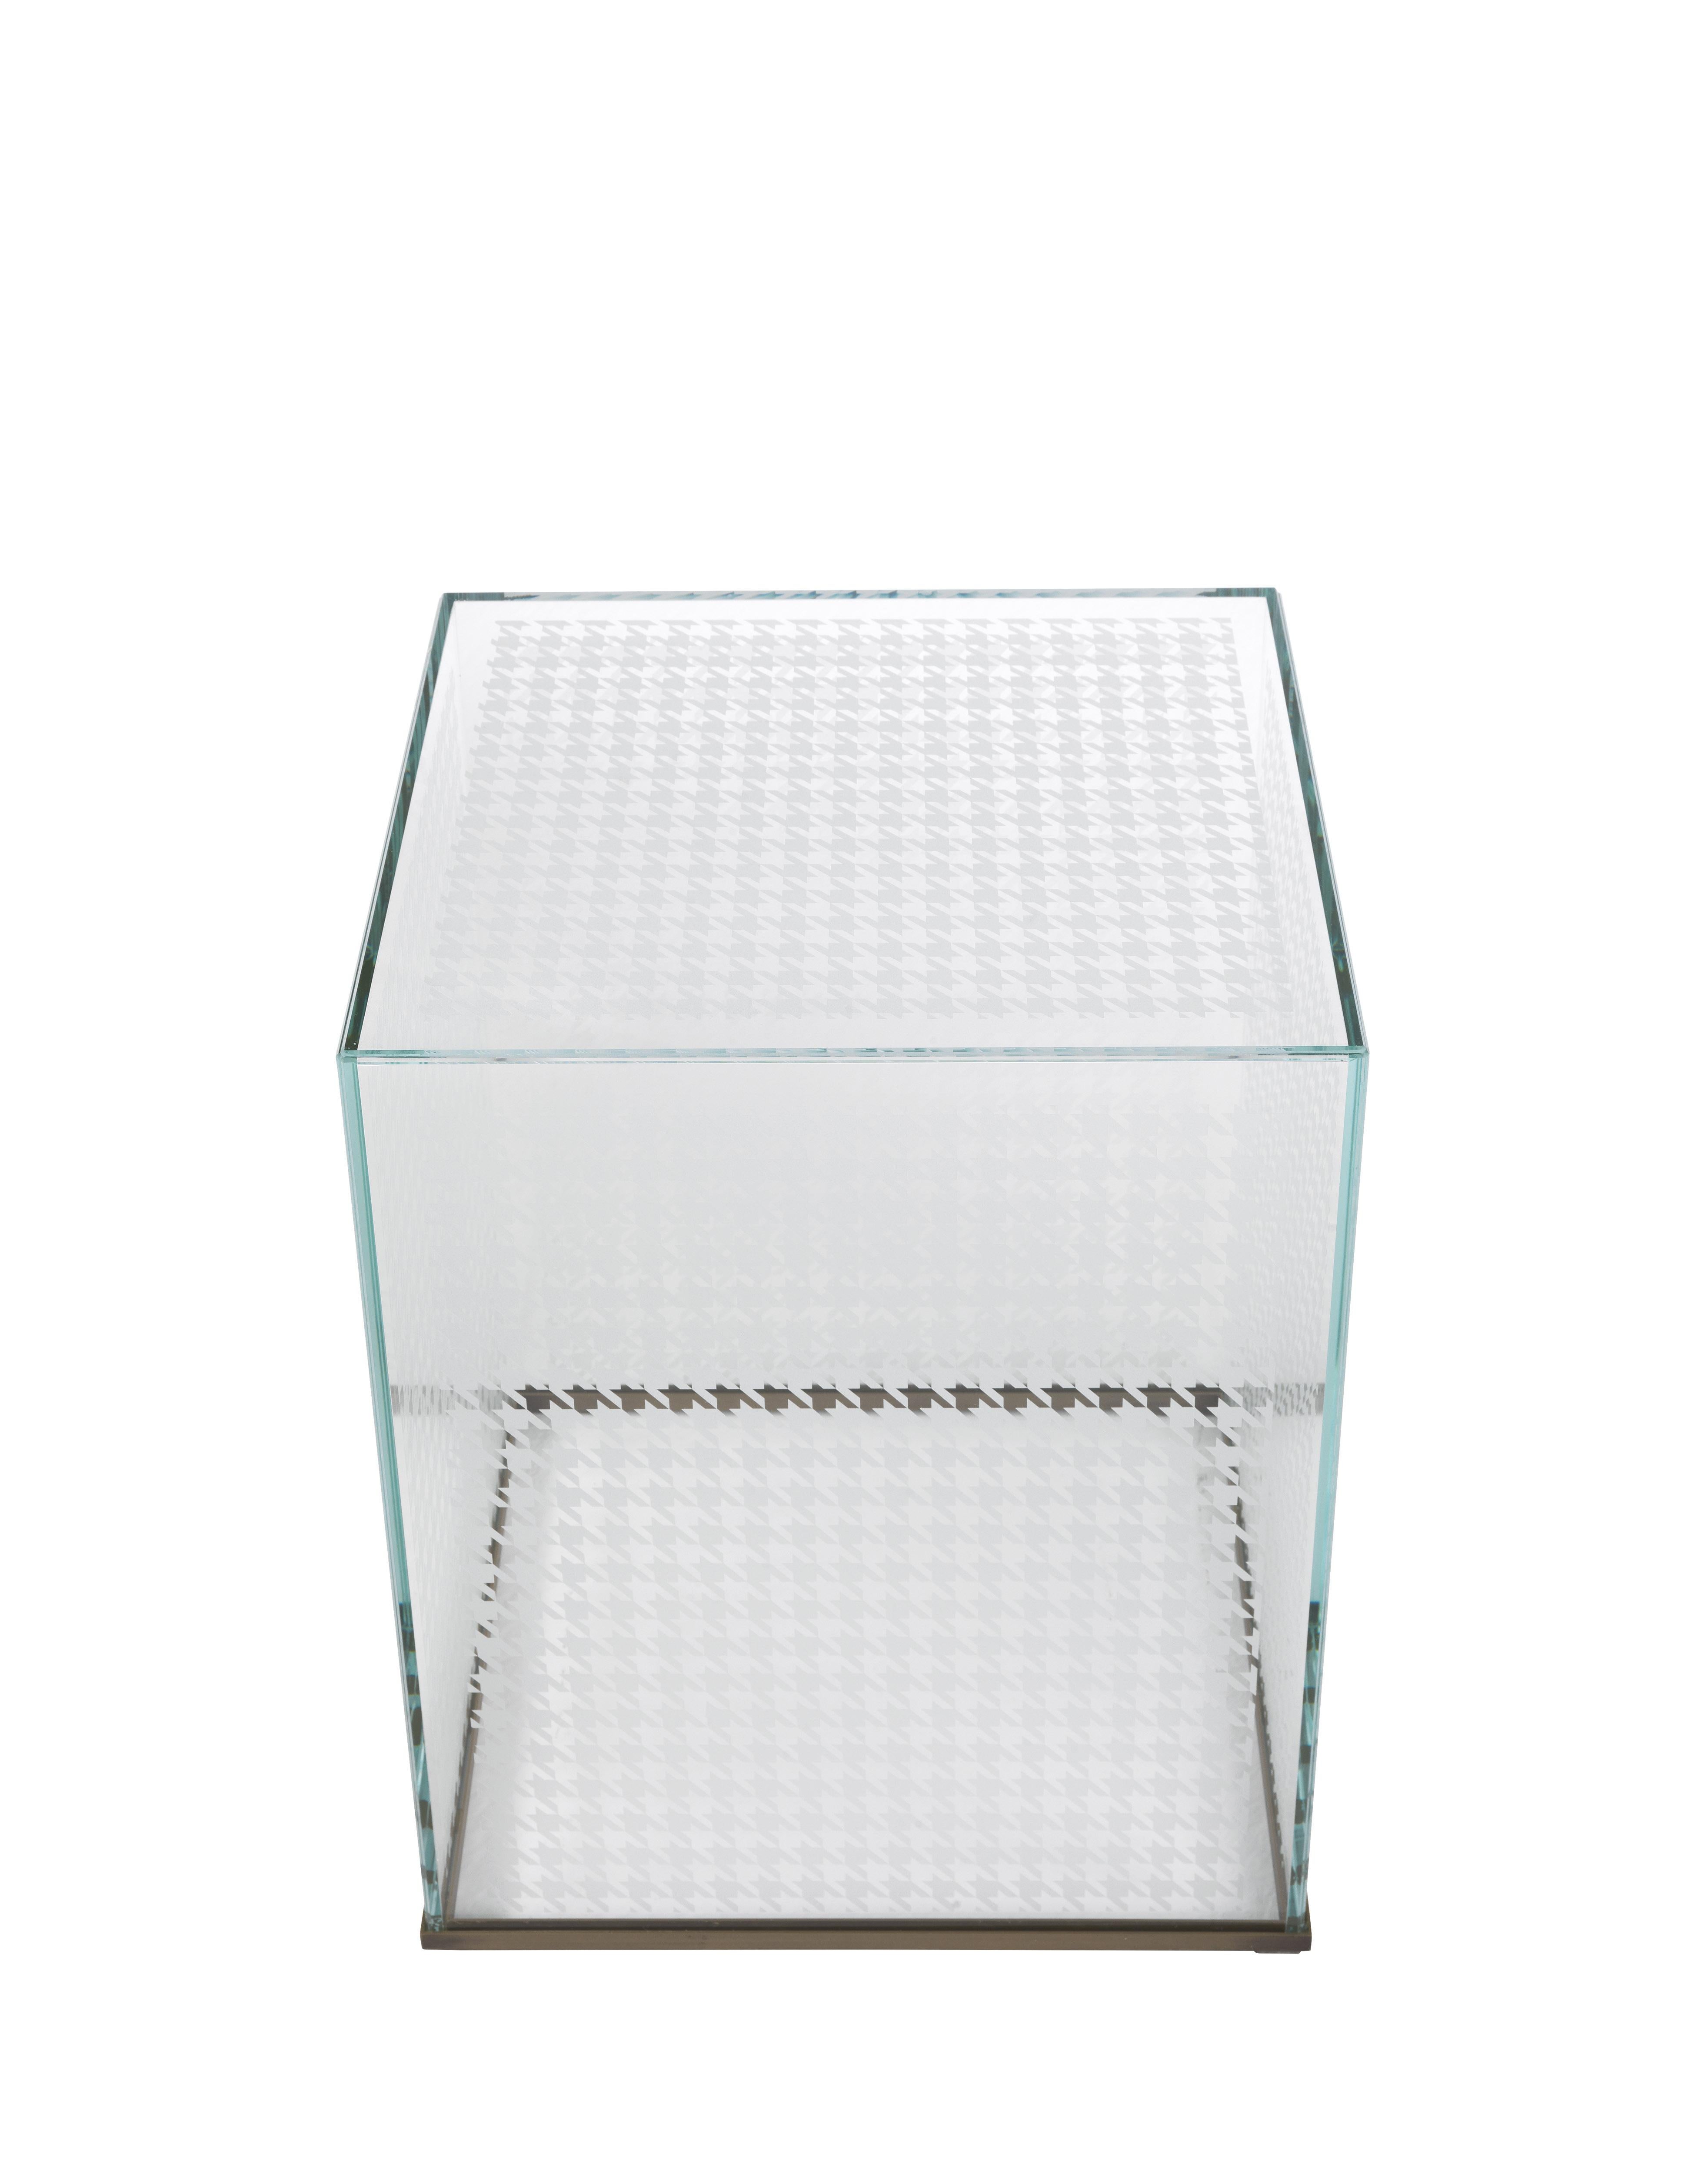 In Echo Park side table, the minimalism of the shapes and the transparency of the glass are combined with the pied de poule decoration, the typical menswear pattern that links us to the identity of the fashion brand Gianfranco Ferré.
Echo Park side